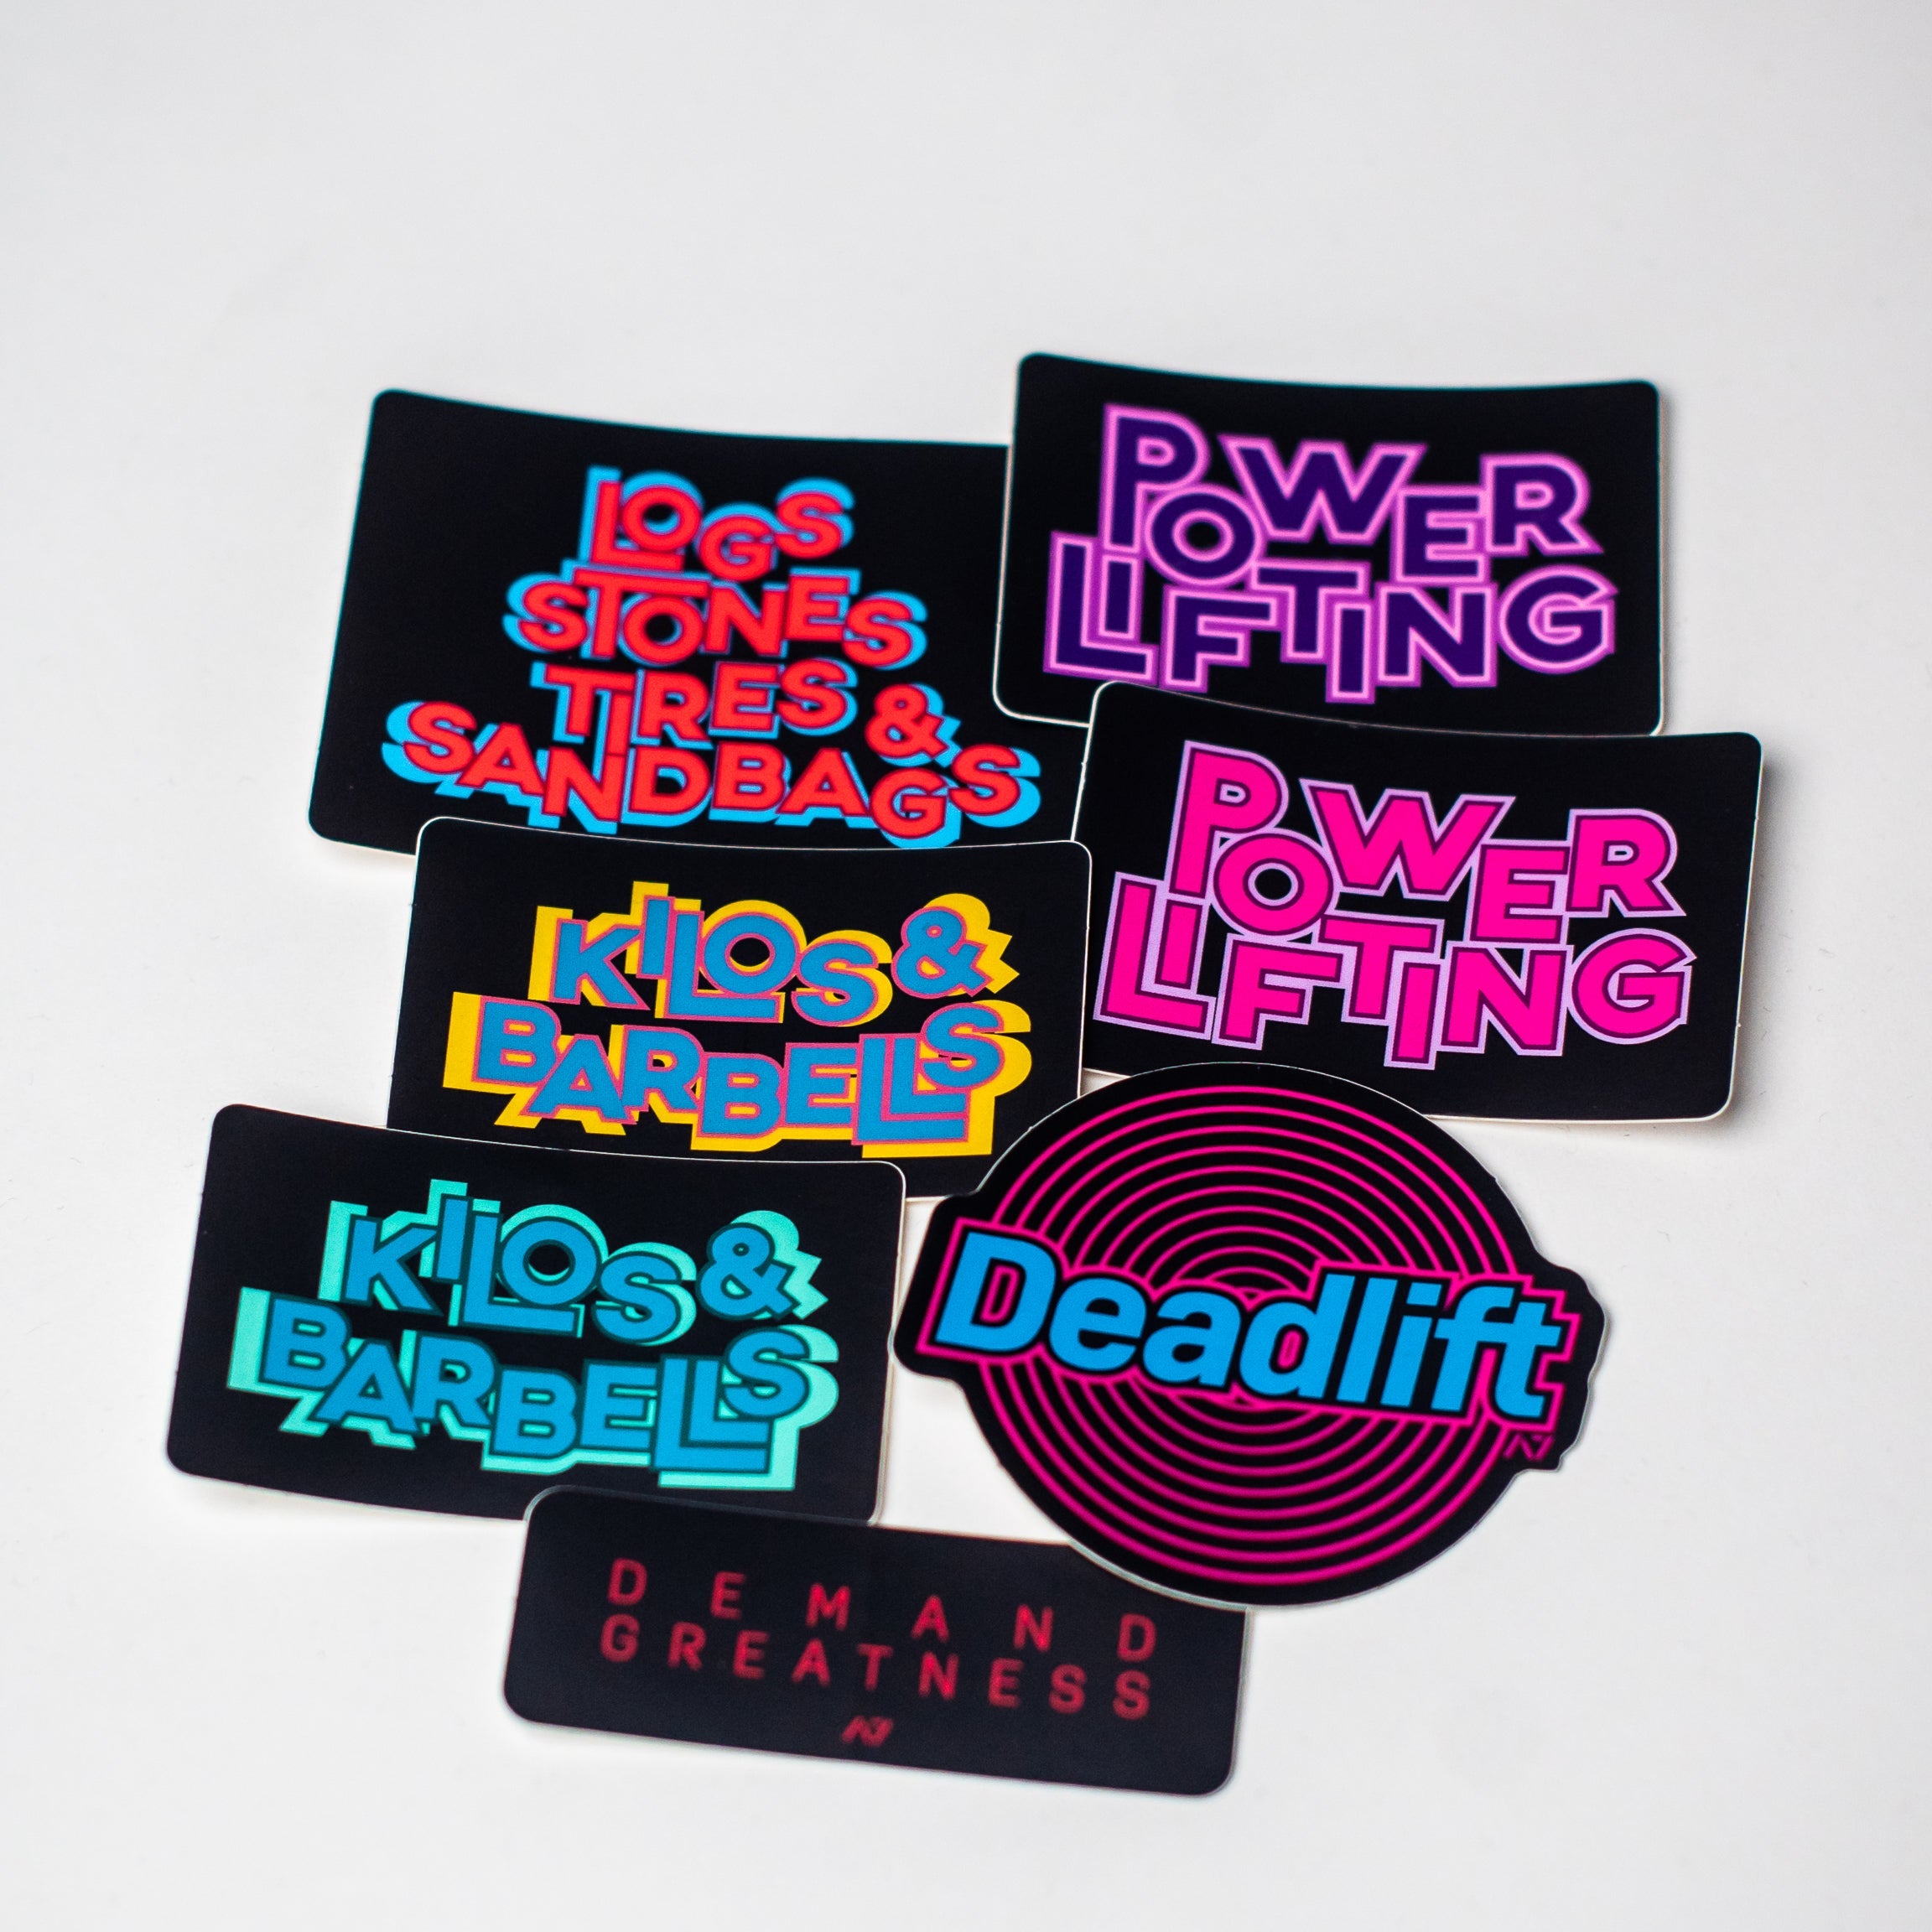 A7 Kilos and Barbells Overtone Sticker combines the dark with the fun and colourful designs to bring that pop of colour into the daily workouts. The sticker dye-cut, made from durable polypropylene and is 3 in wide x 2 in high. Purchase Kilos and Barbells Overtone Sticker from A7 UK.